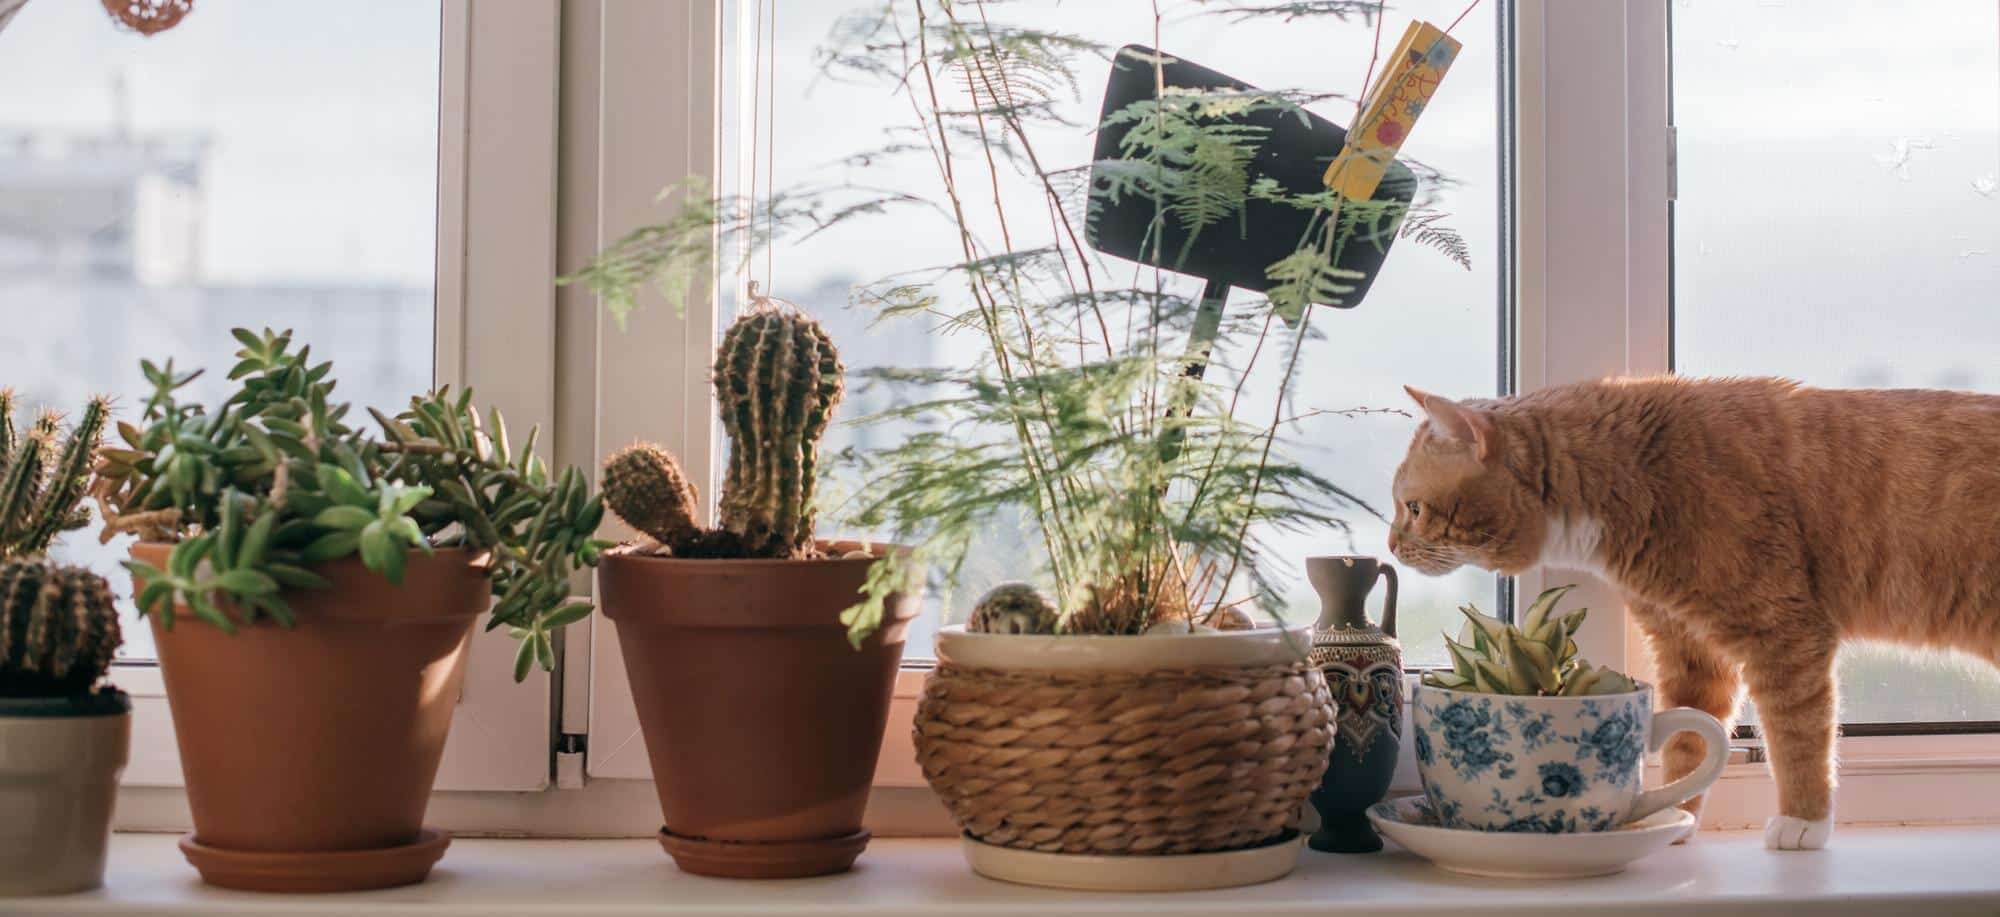 Top 10 Pet-Friendly Indoor Plants: Non-Toxic Options for Your Home